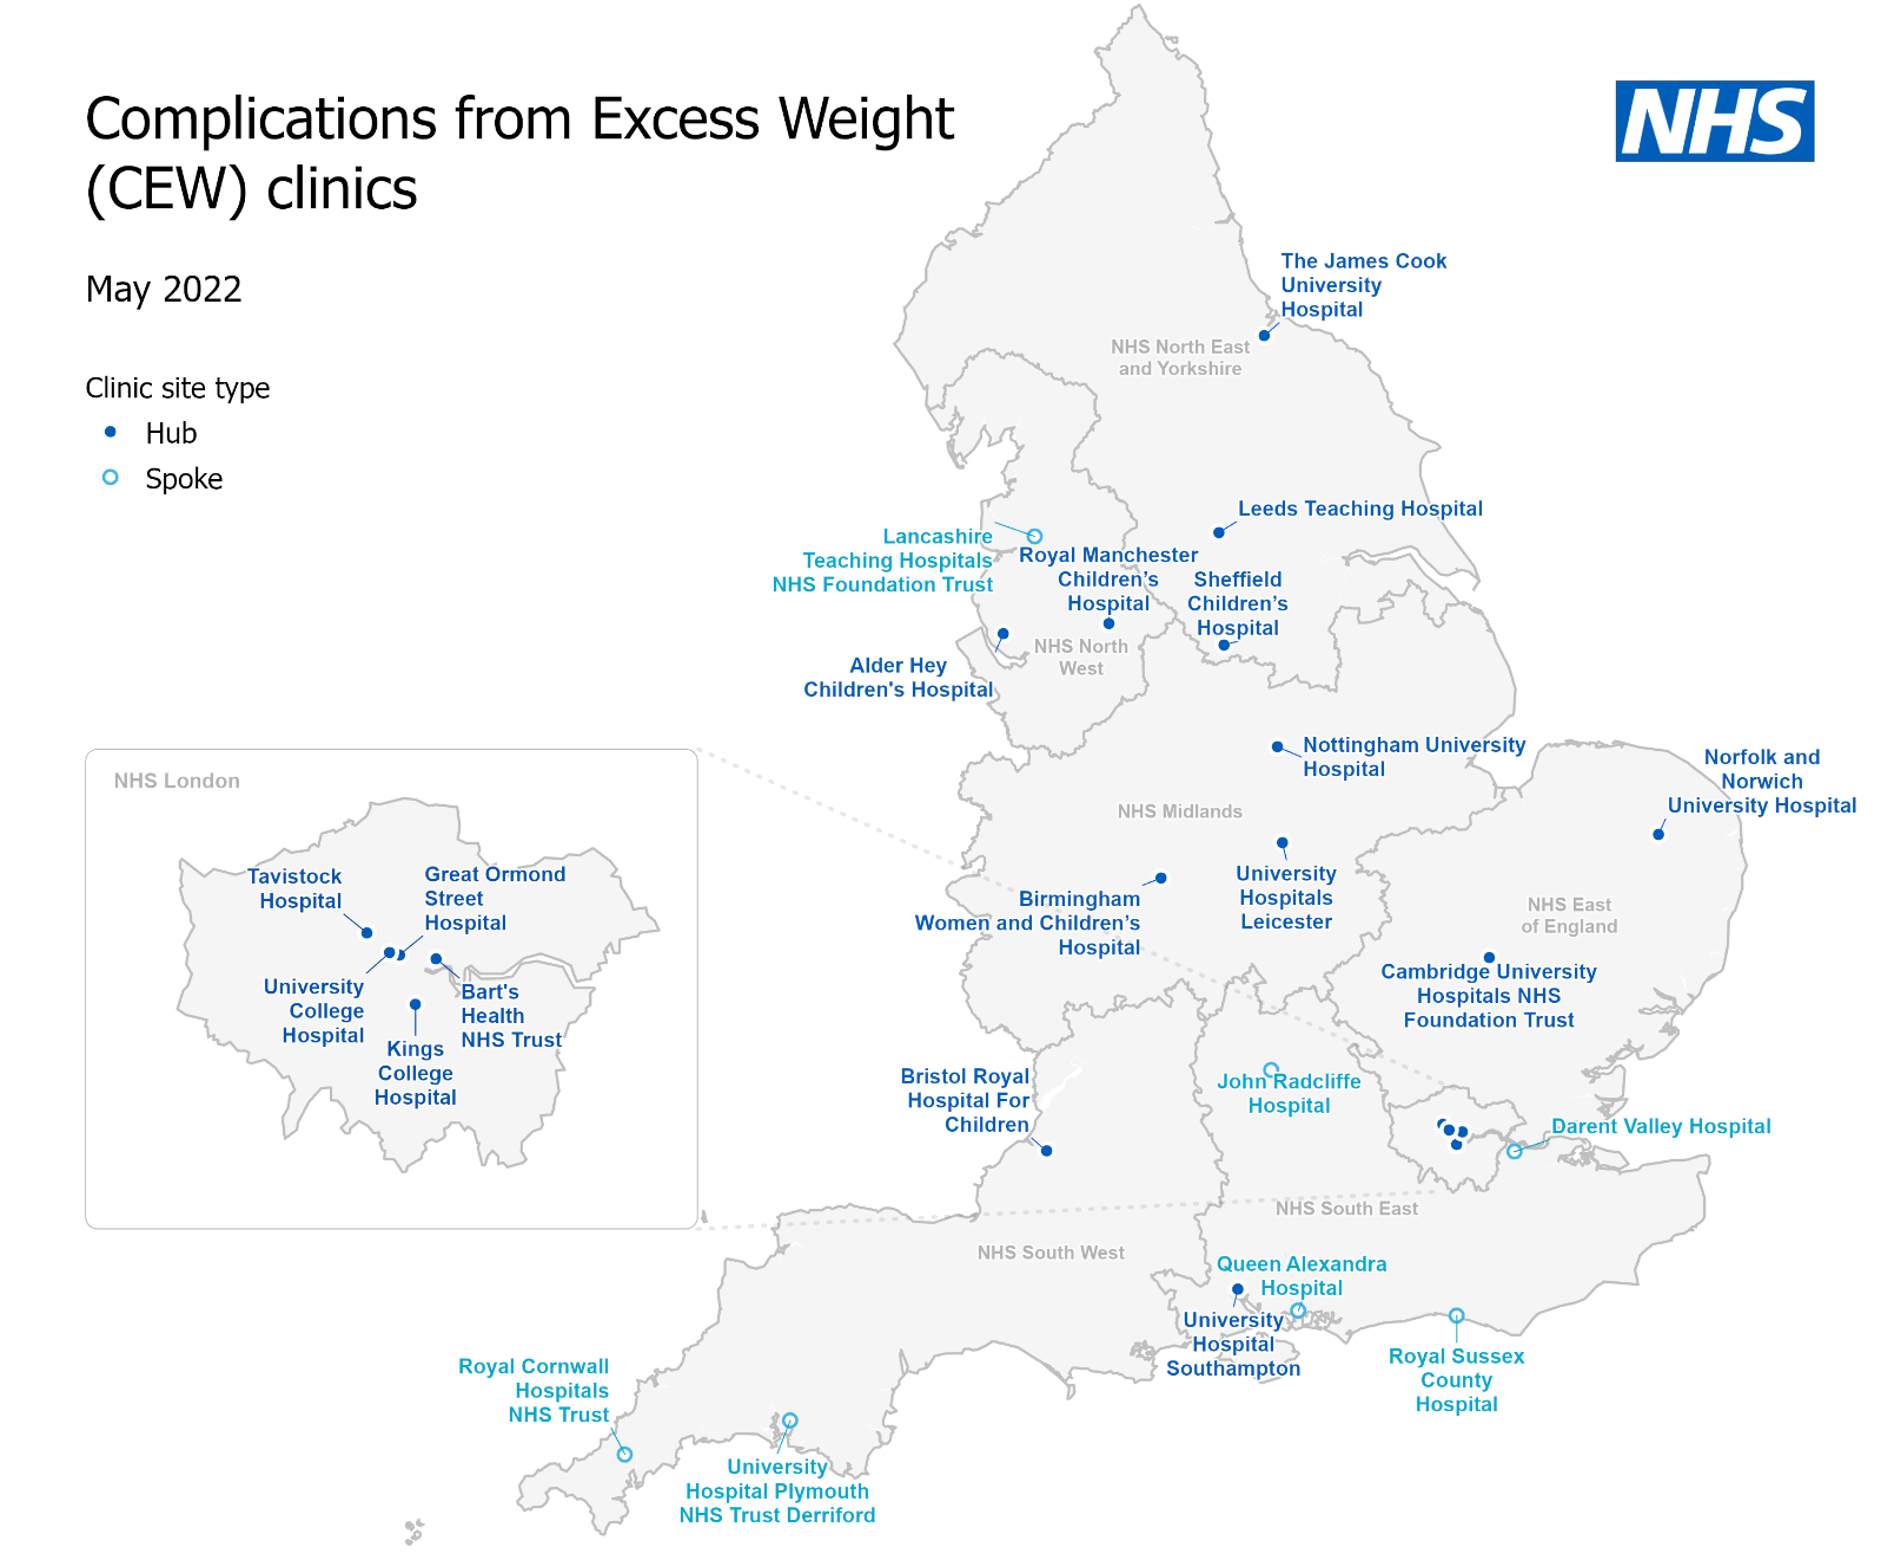 Map of Complications from Excess Weight clinics